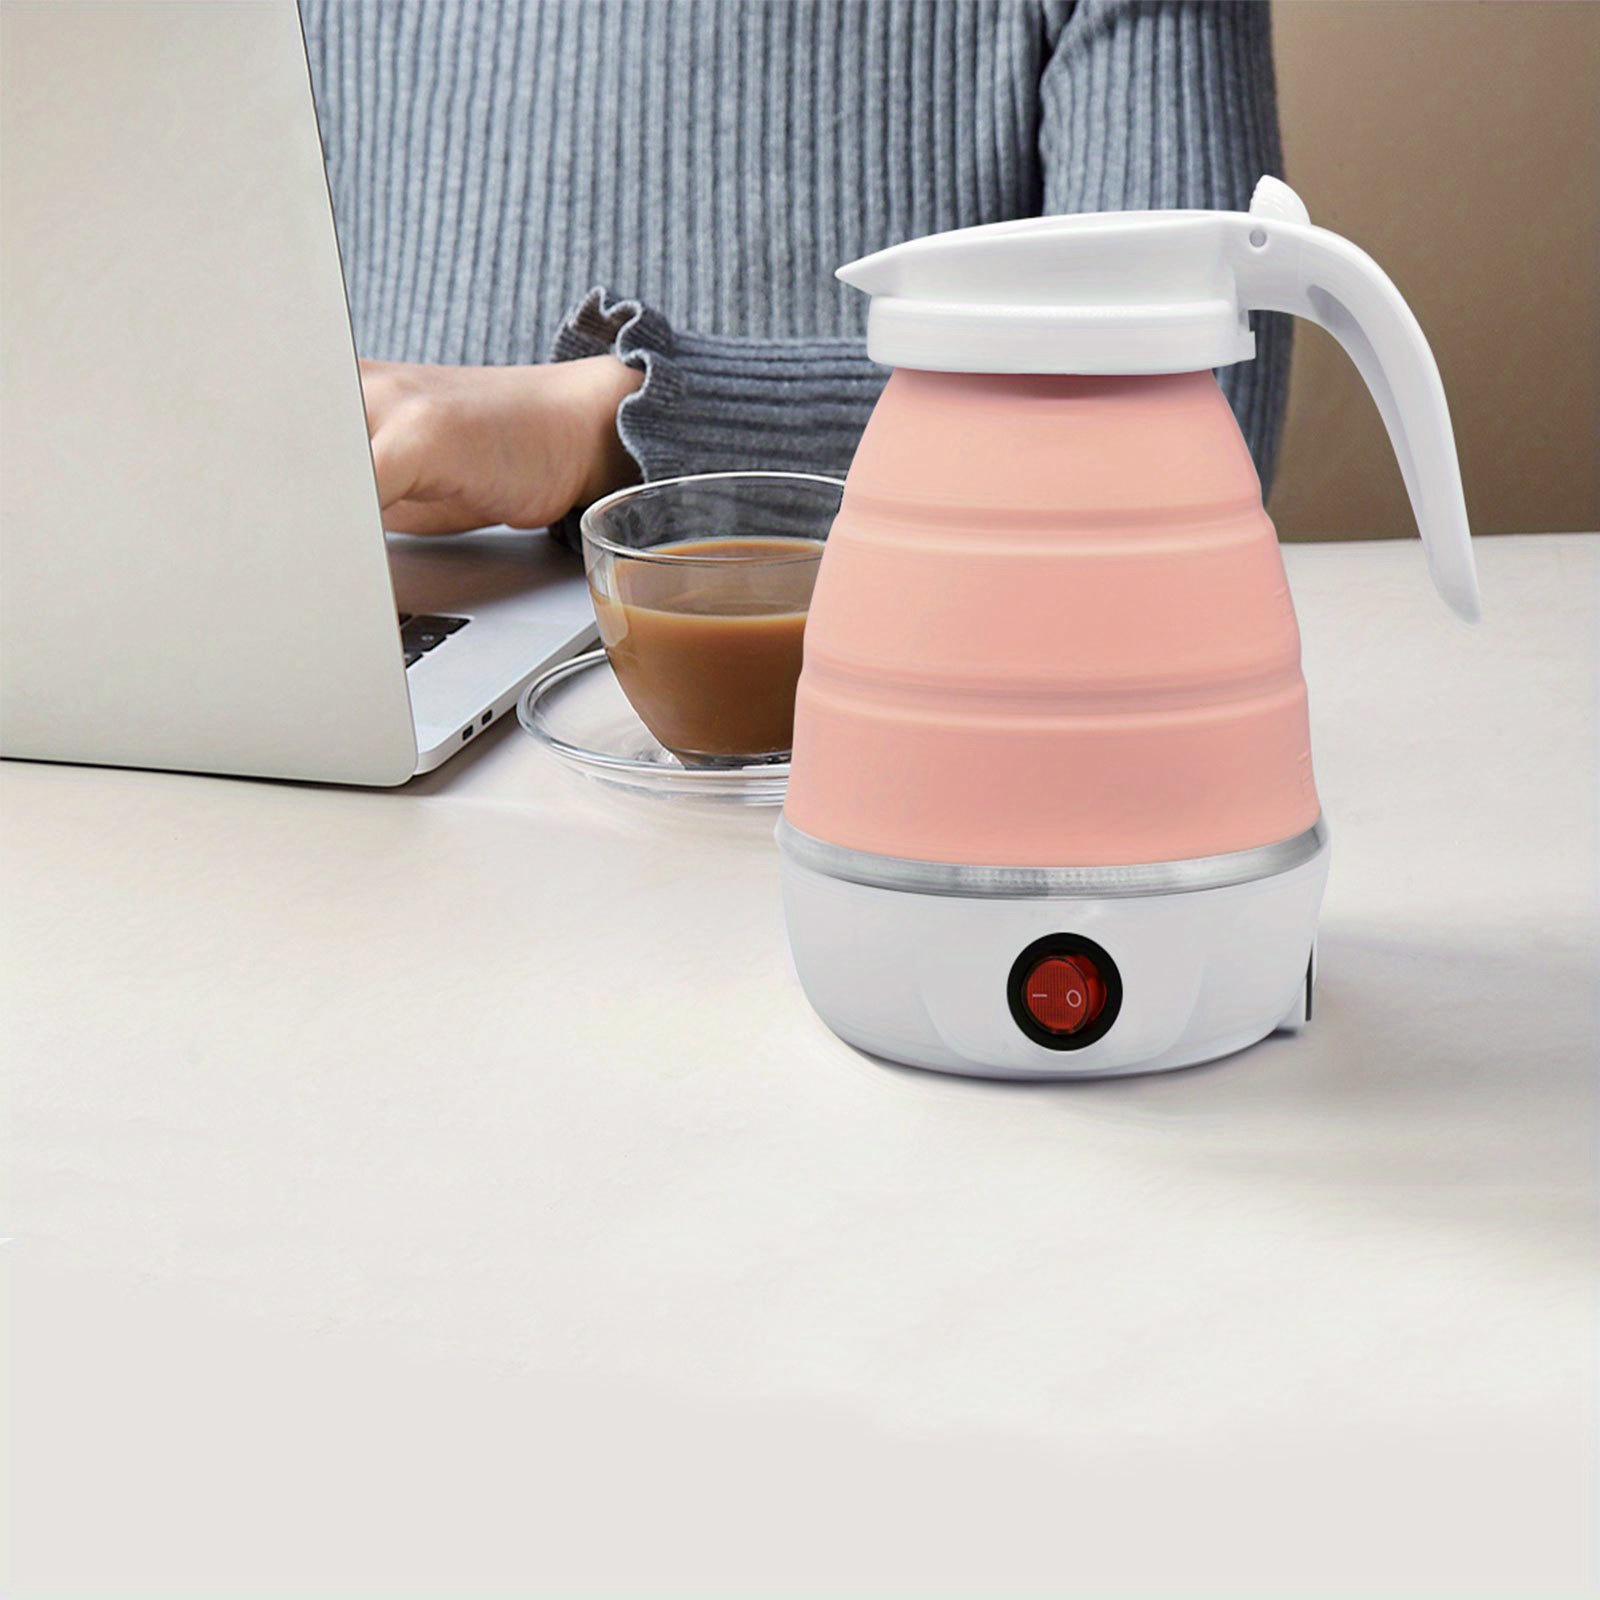 travel folding electric kettle portable upgraded food grade silicone 304 stainless steel heating base 600ml kettle 5 minute rapid boiling convenient storage detachable power cord 110v blue white pink details 5